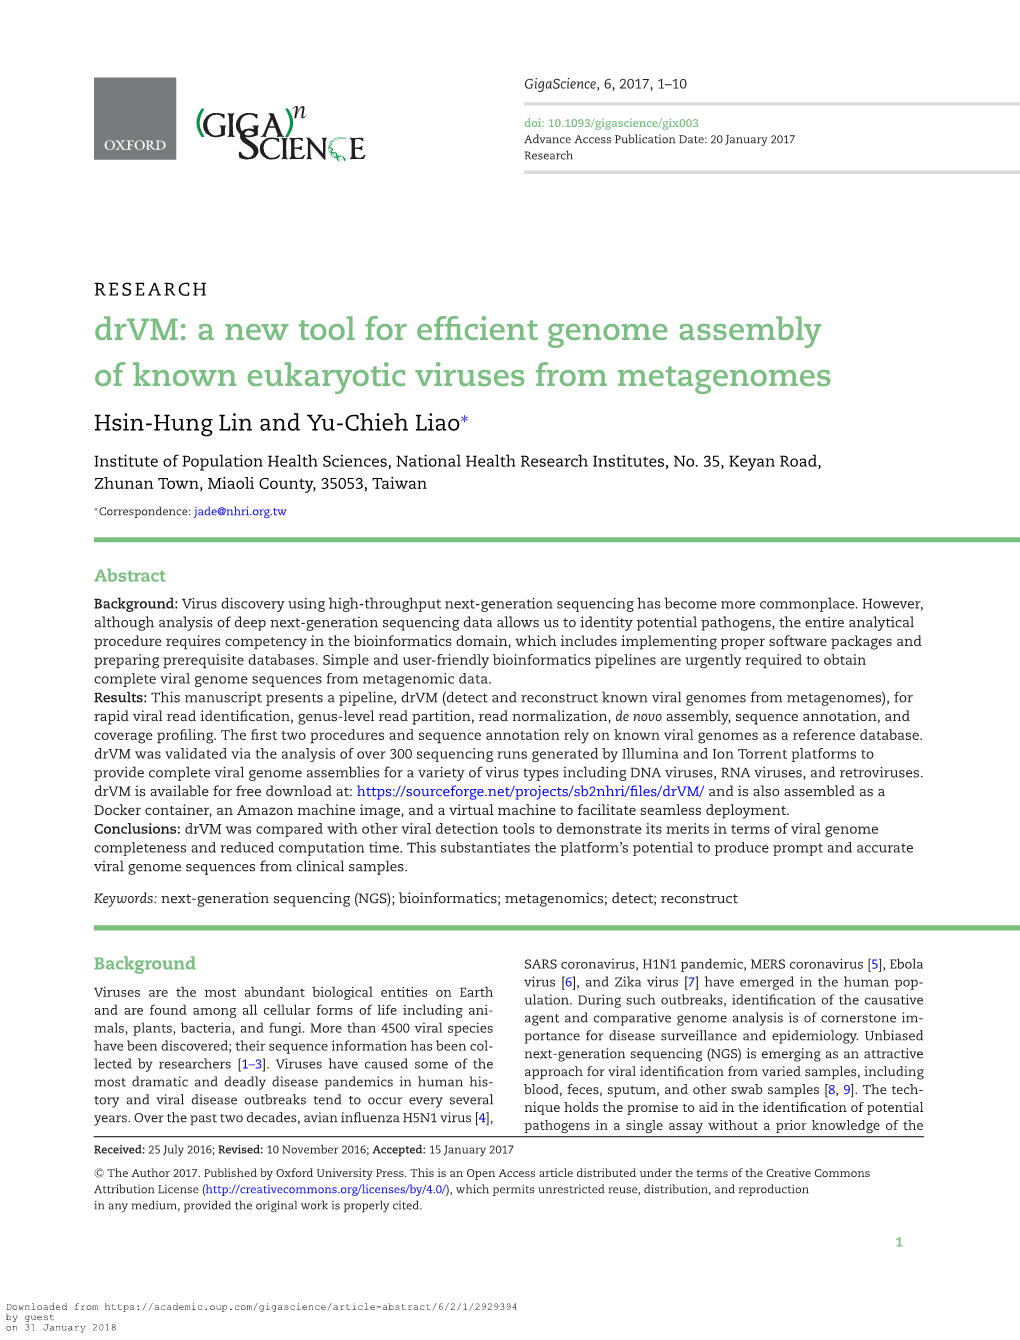 Drvm: a New Tool for Efficient Genome Assembly of Known Eukaryotic Viruses from Metagenomes Hsin-Hung Lin and Yu-Chieh Liao∗